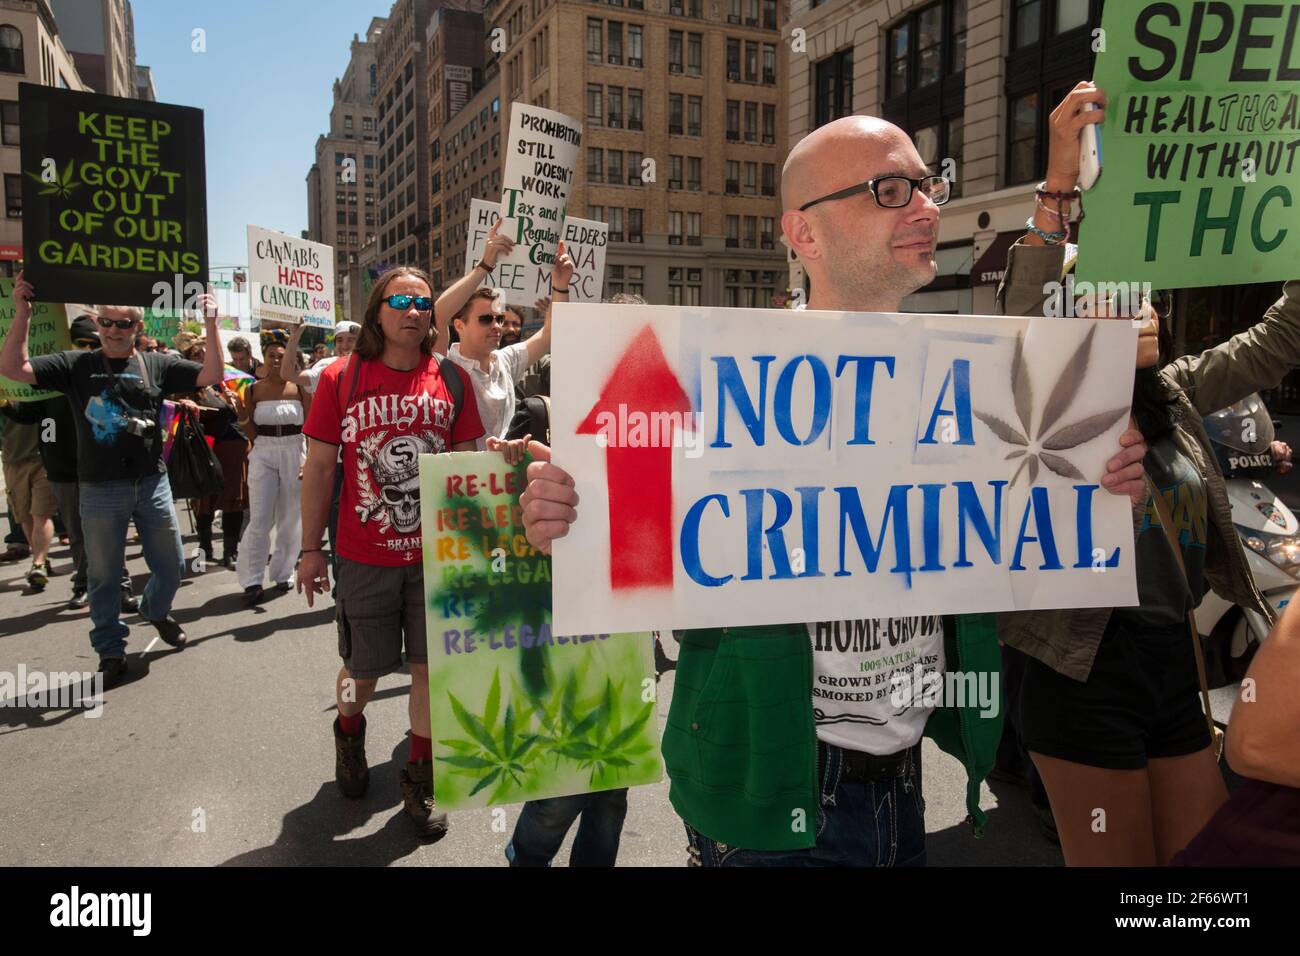 New York City, USA. 04th May, 2013. Advocates for the legalization of marijuana march in New York on Saturday, May 4, 2013 at the annual March For Marijuana. The march included a wide range of demographics from young people to old-time hippies. The participants in the parade called for the use of marijuana for medical treatment and for recreational uses. (Photo by Richard B. Levine) Credit: Sipa USA/Alamy Live News Stock Photo